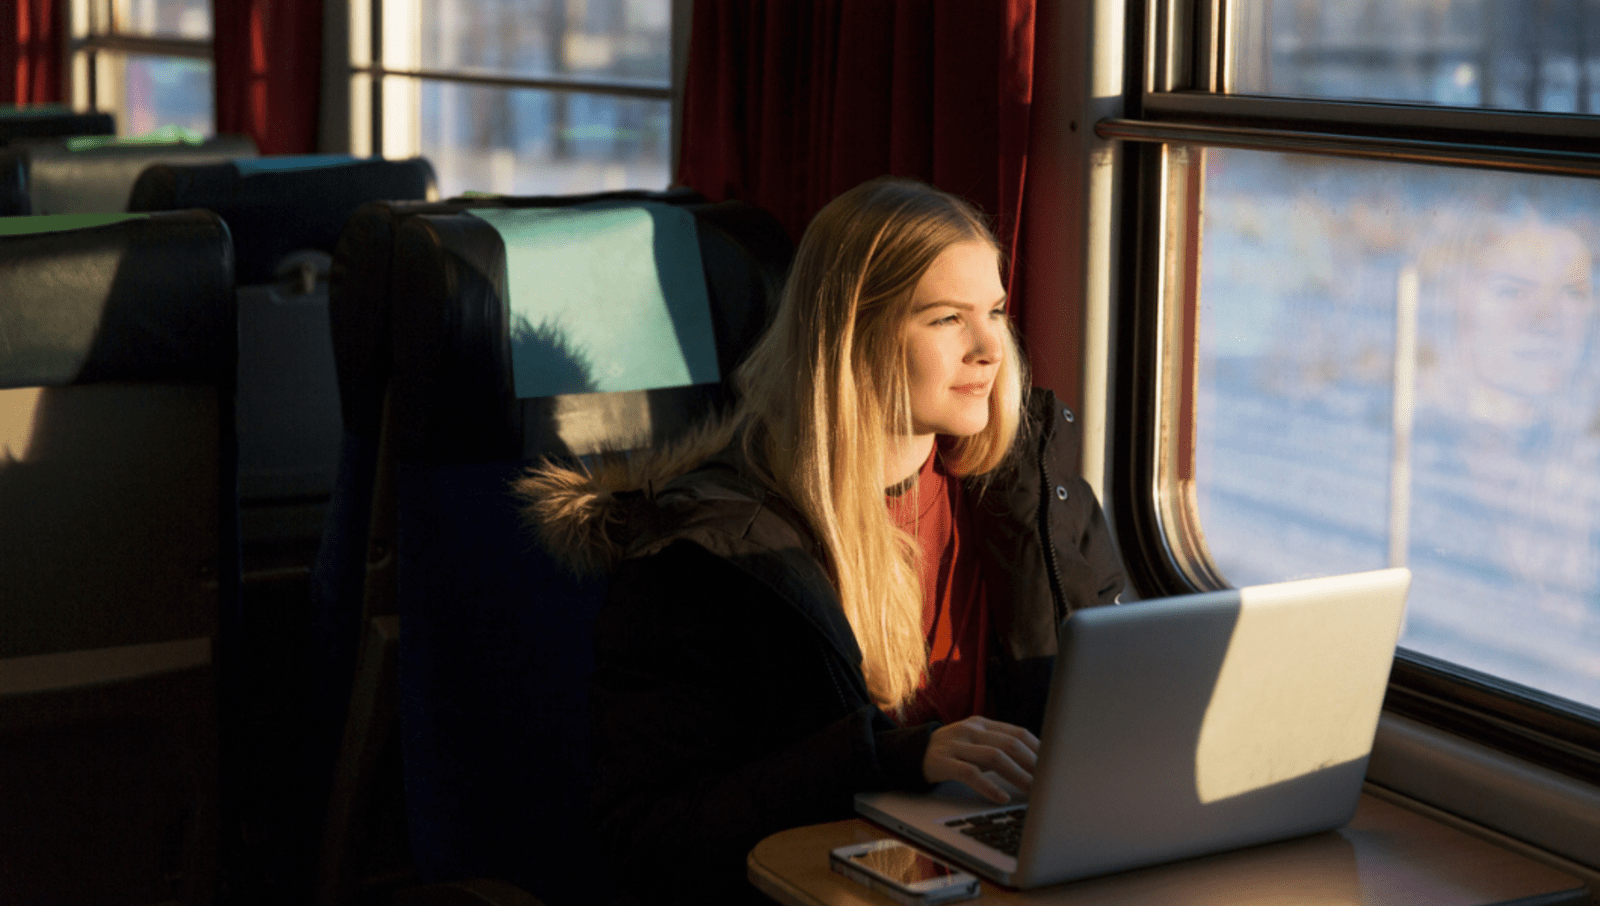 young lady looking out window on train with laptop open on table in front of her